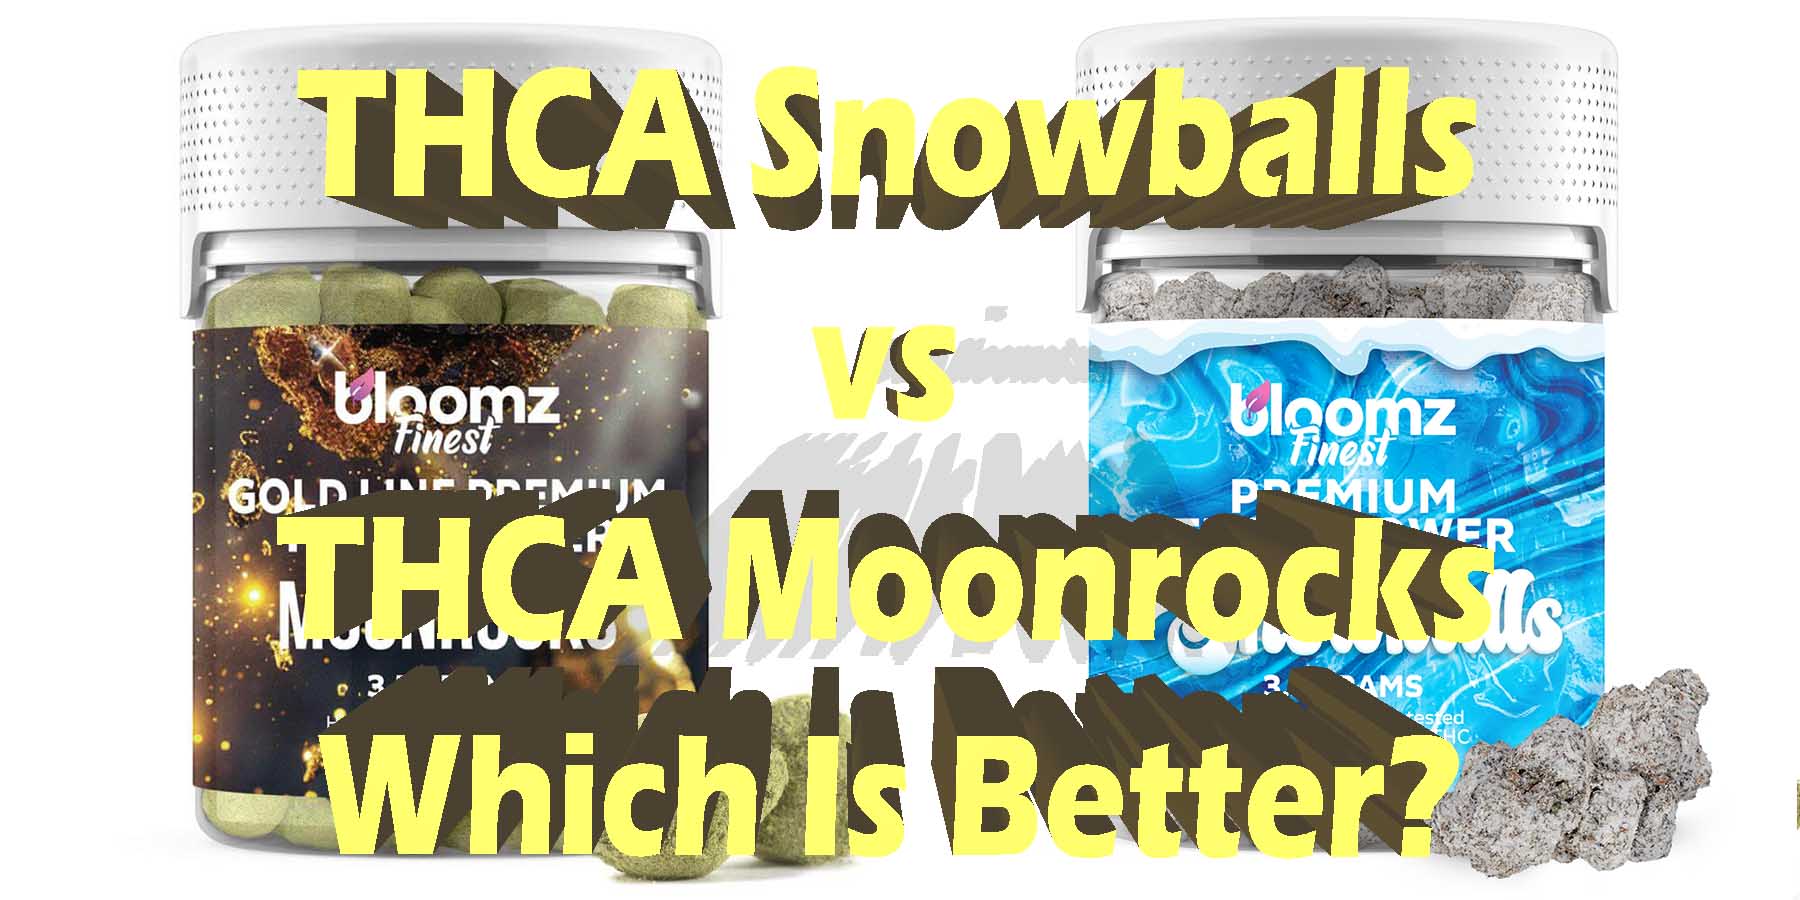 THCA Snowballs vs THCA Moonrocks Which Is Better WhereToGet HowToGetNearMe BestPlace LowestPrice Coupon Discount For Smoking Best Smoke Bloomz